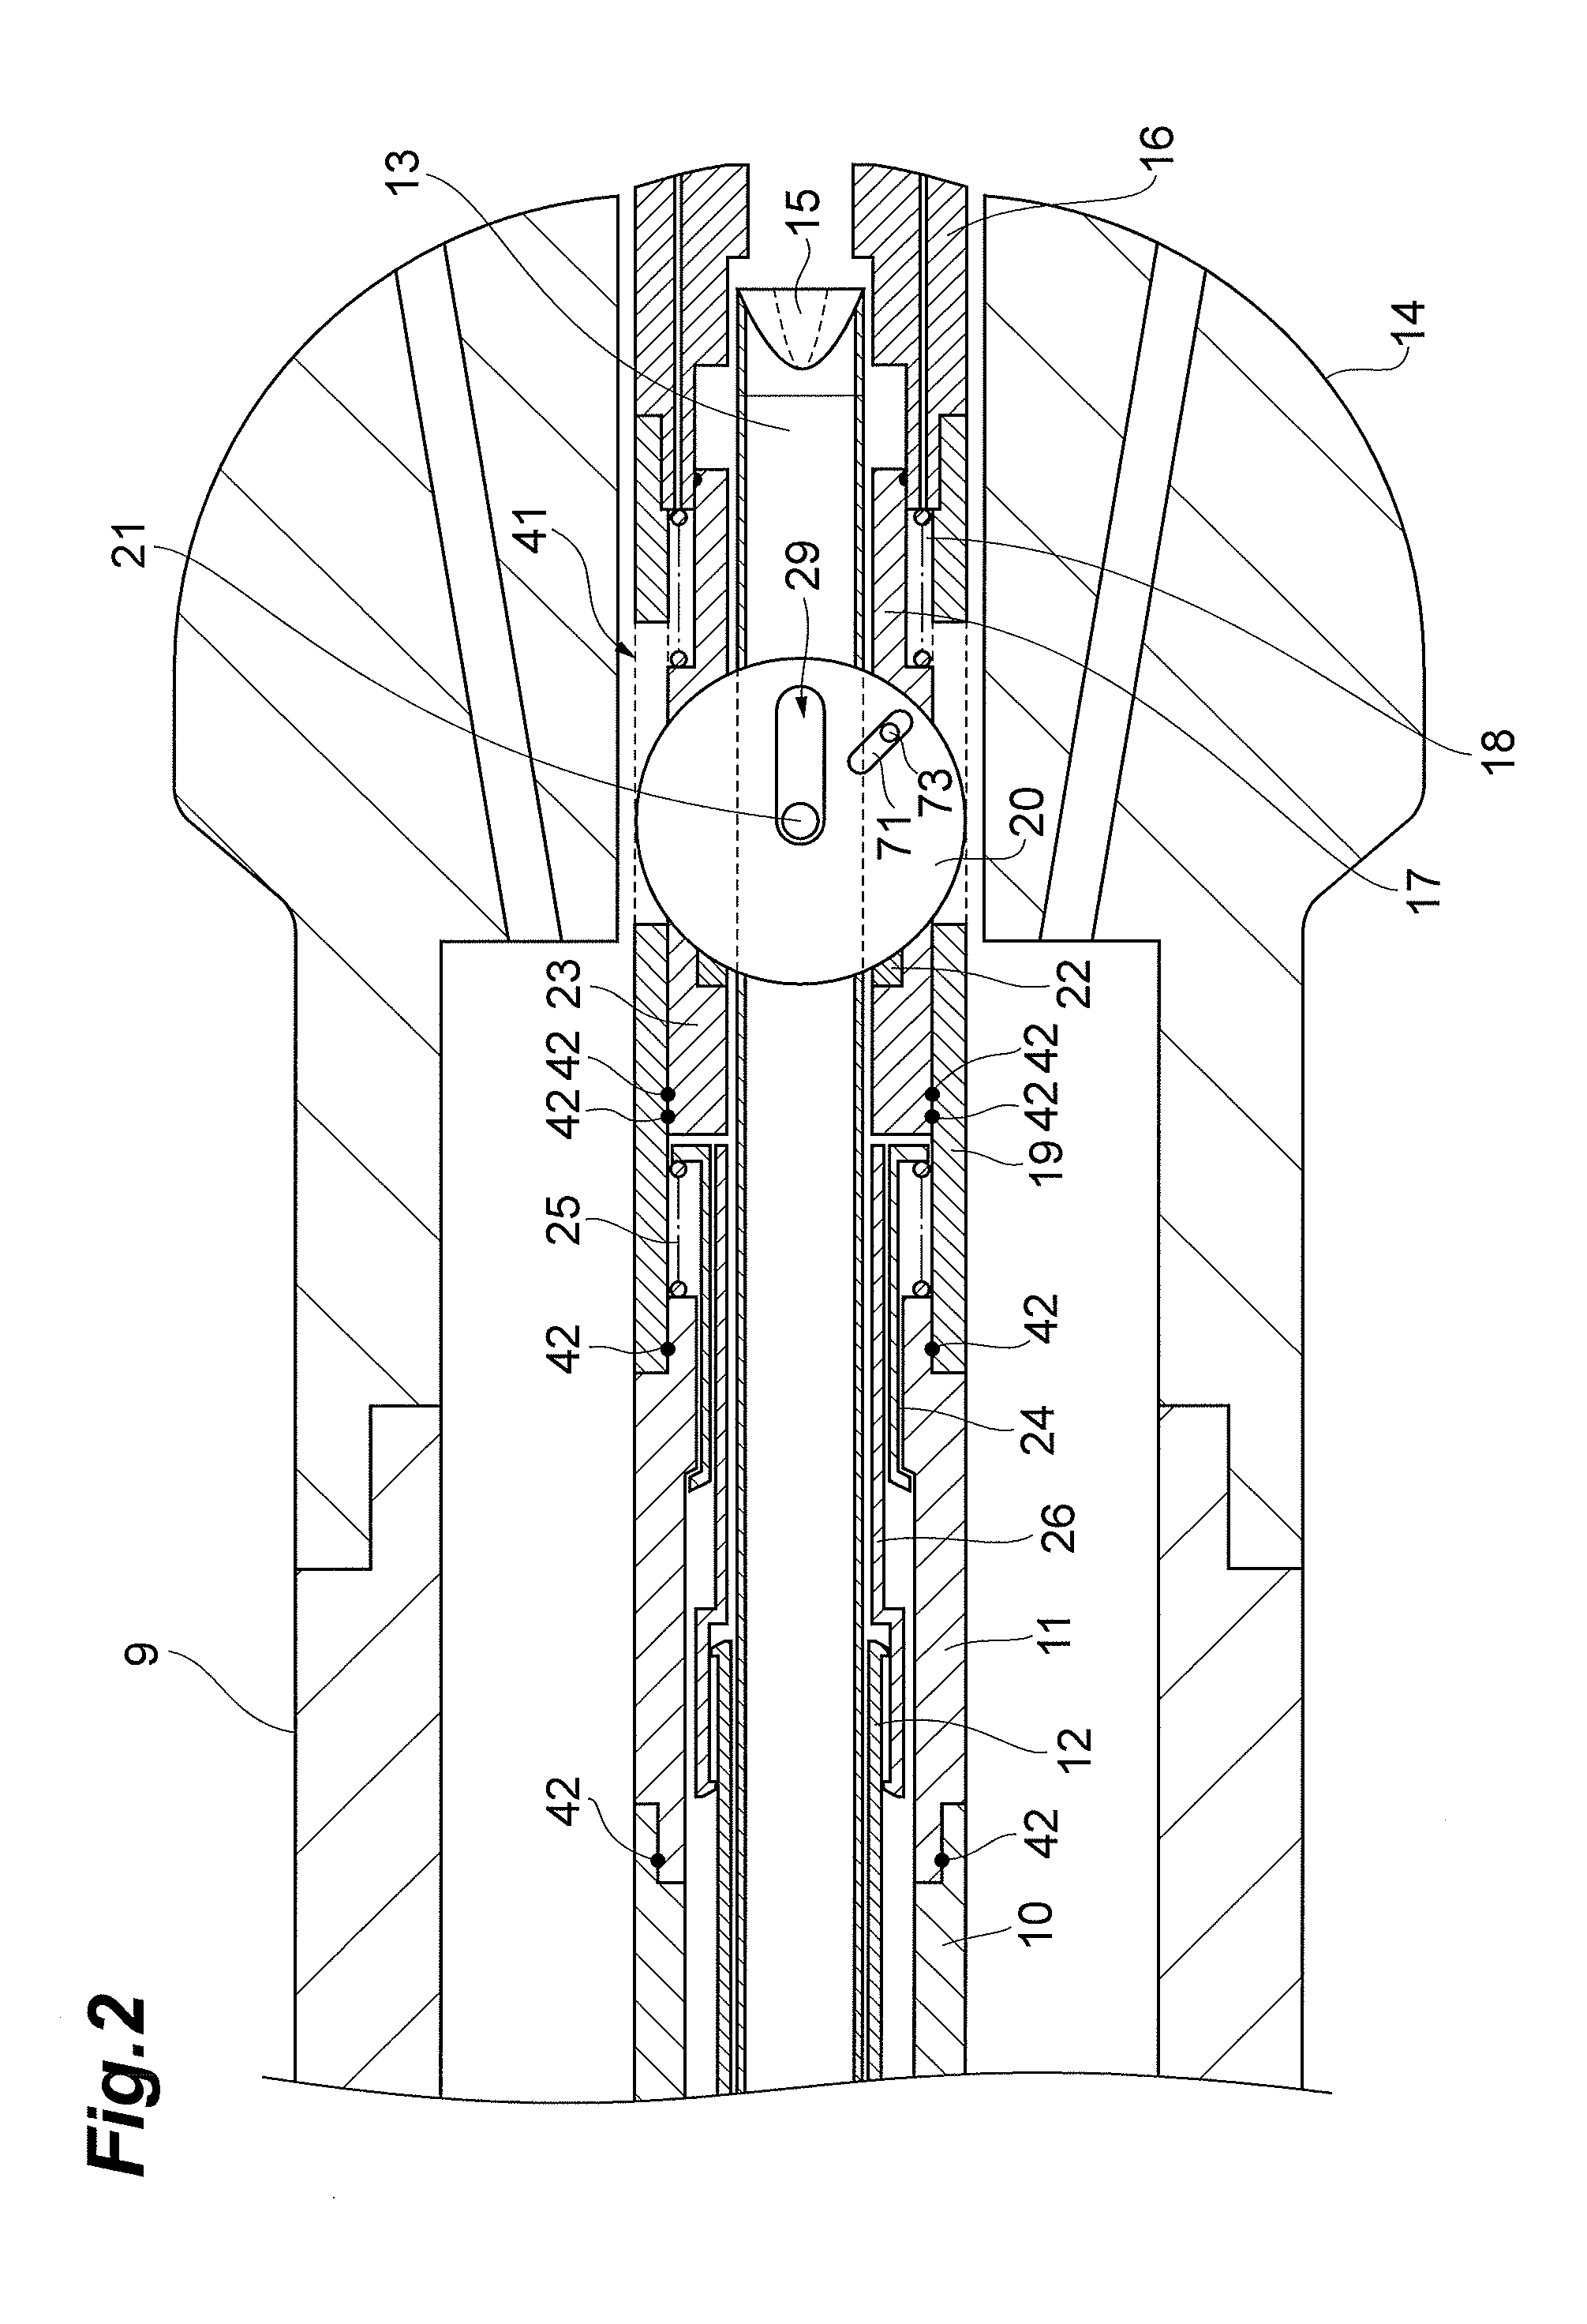 Core sampling apparatus and container transfer apparatus